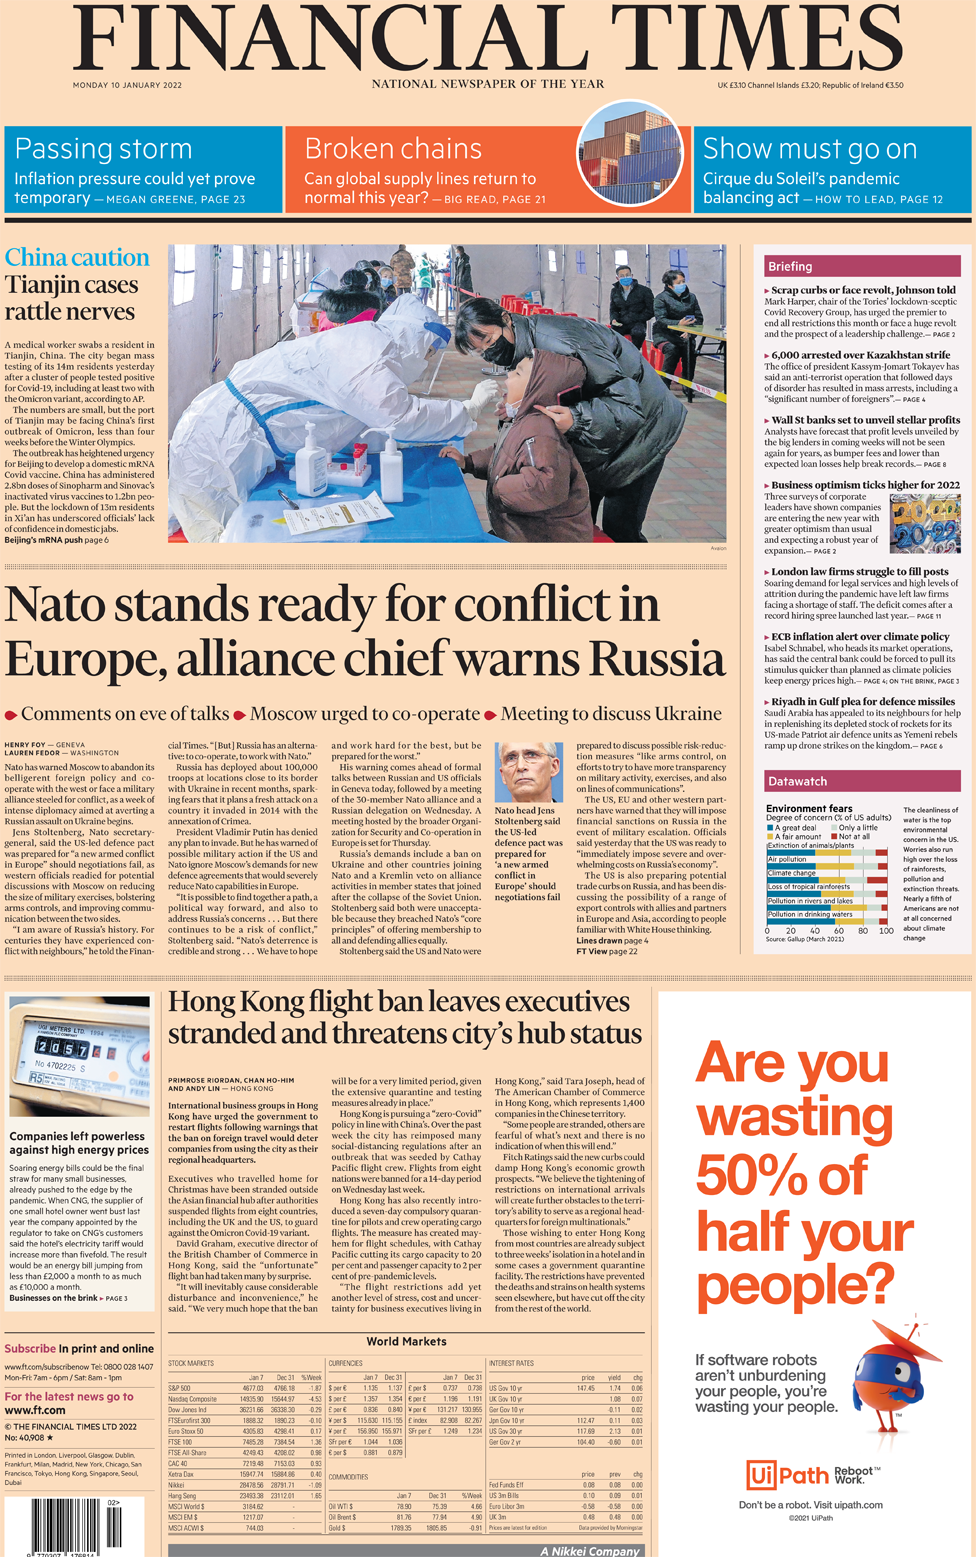 The Financial Times front page 10 January 2022